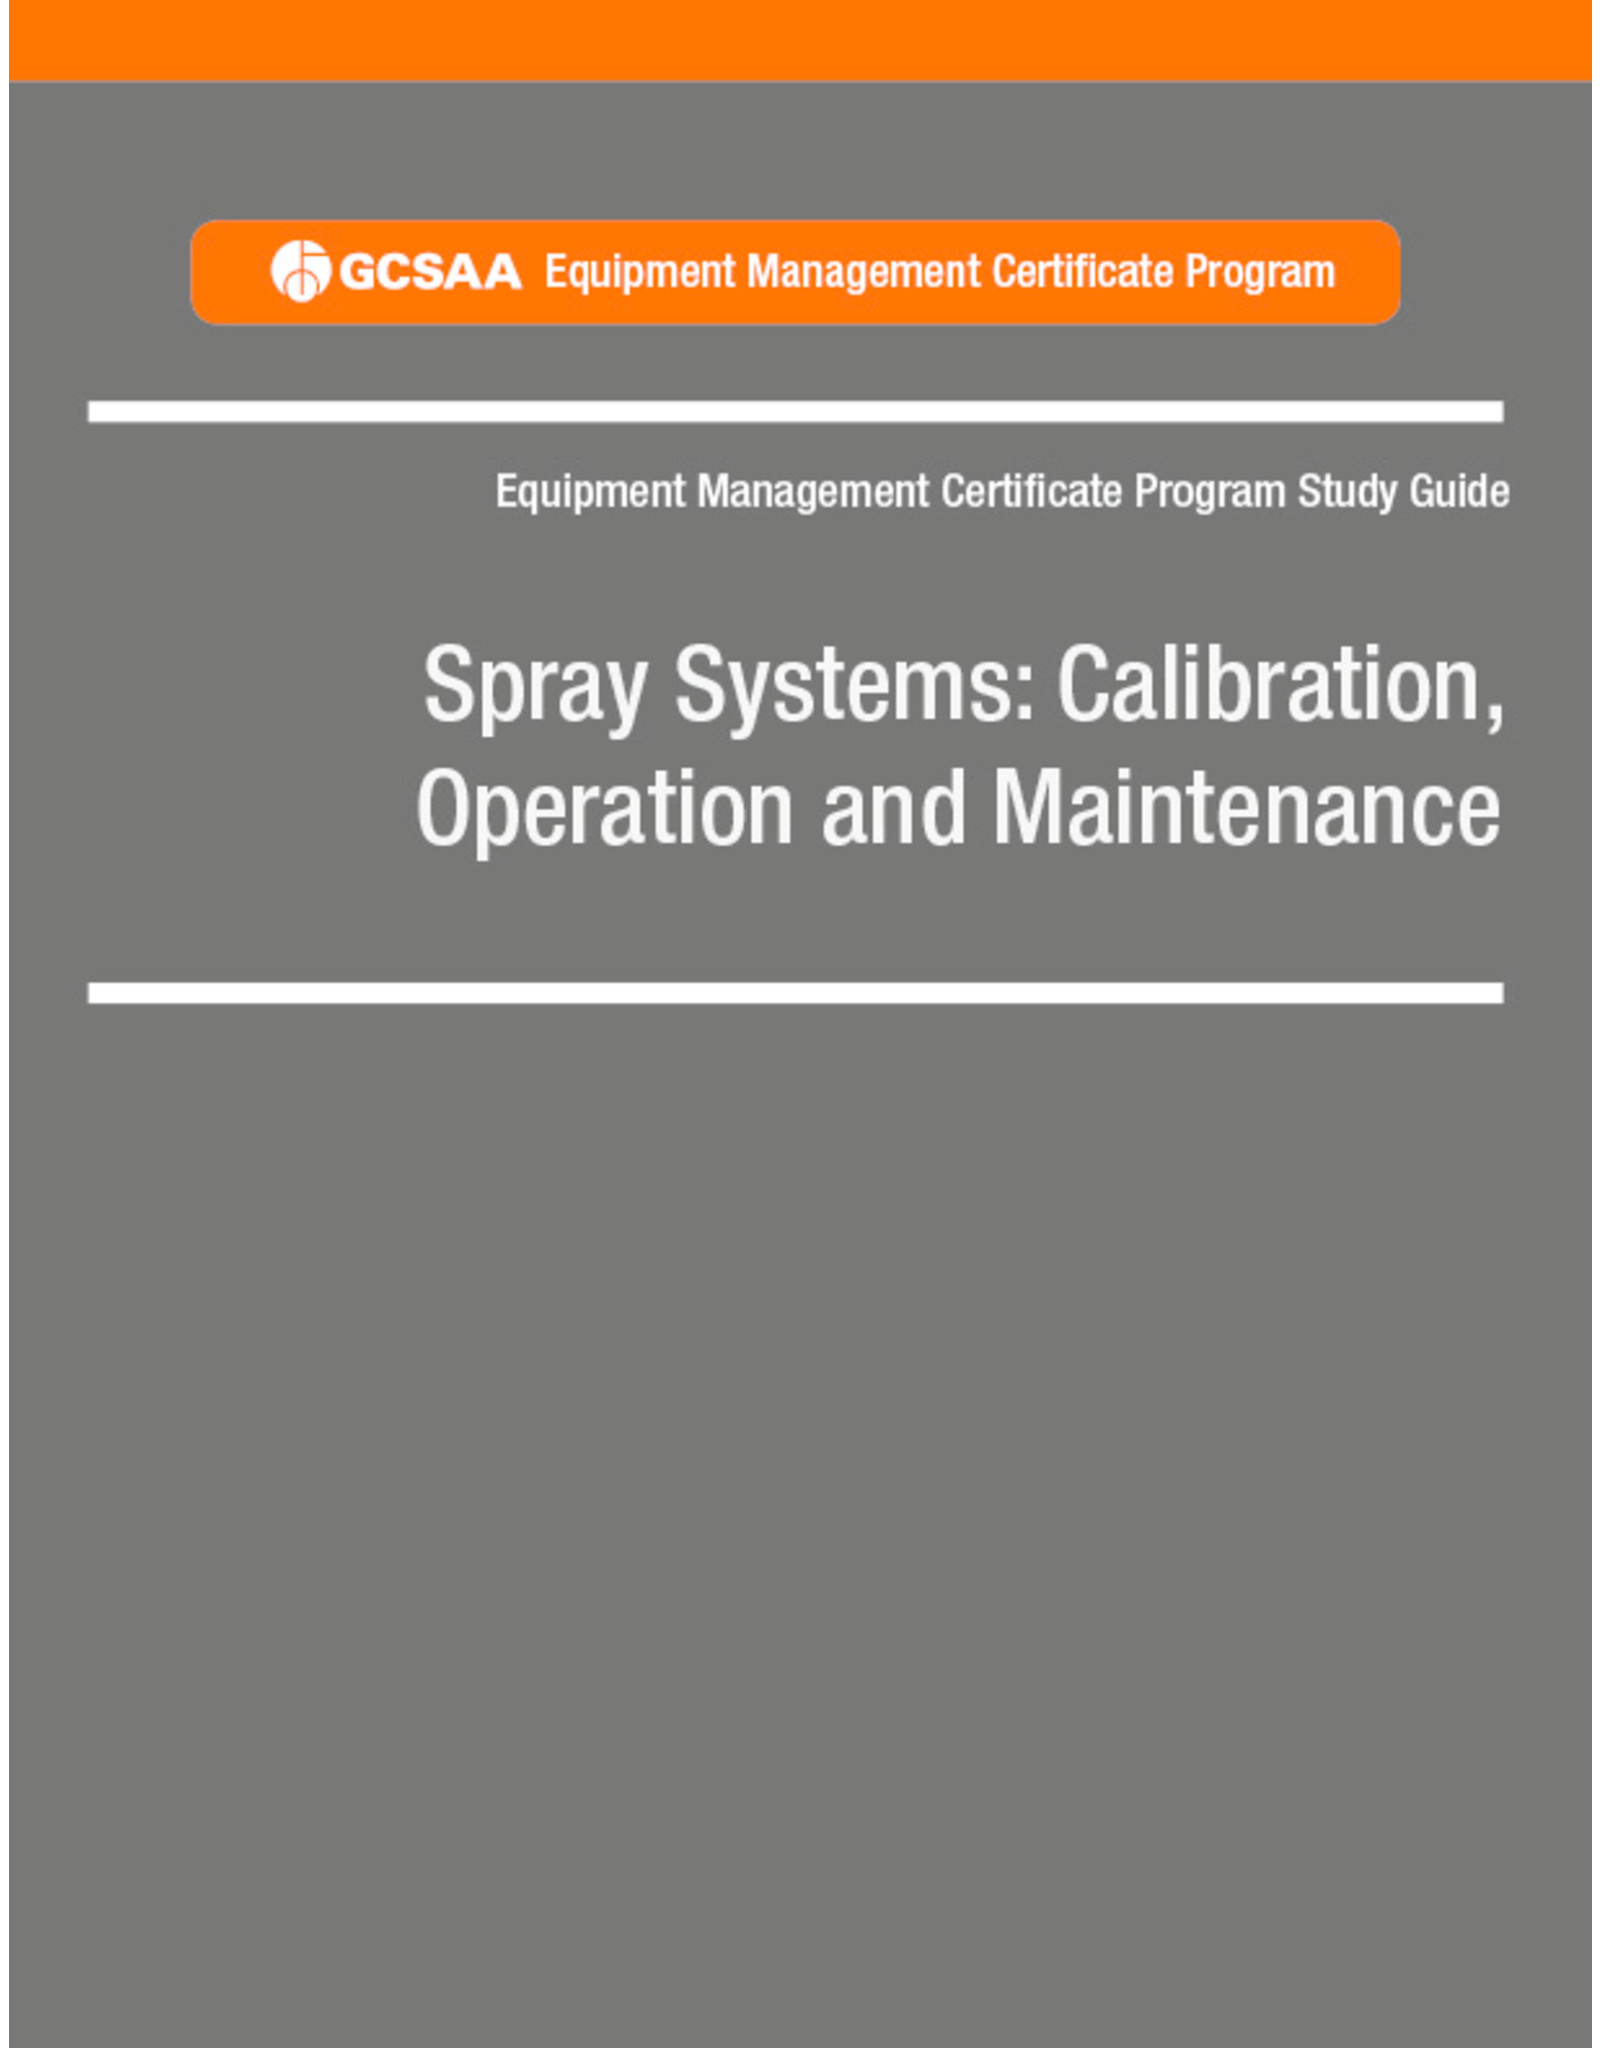 Spray Systems: Calibration, Operation and Maintenance